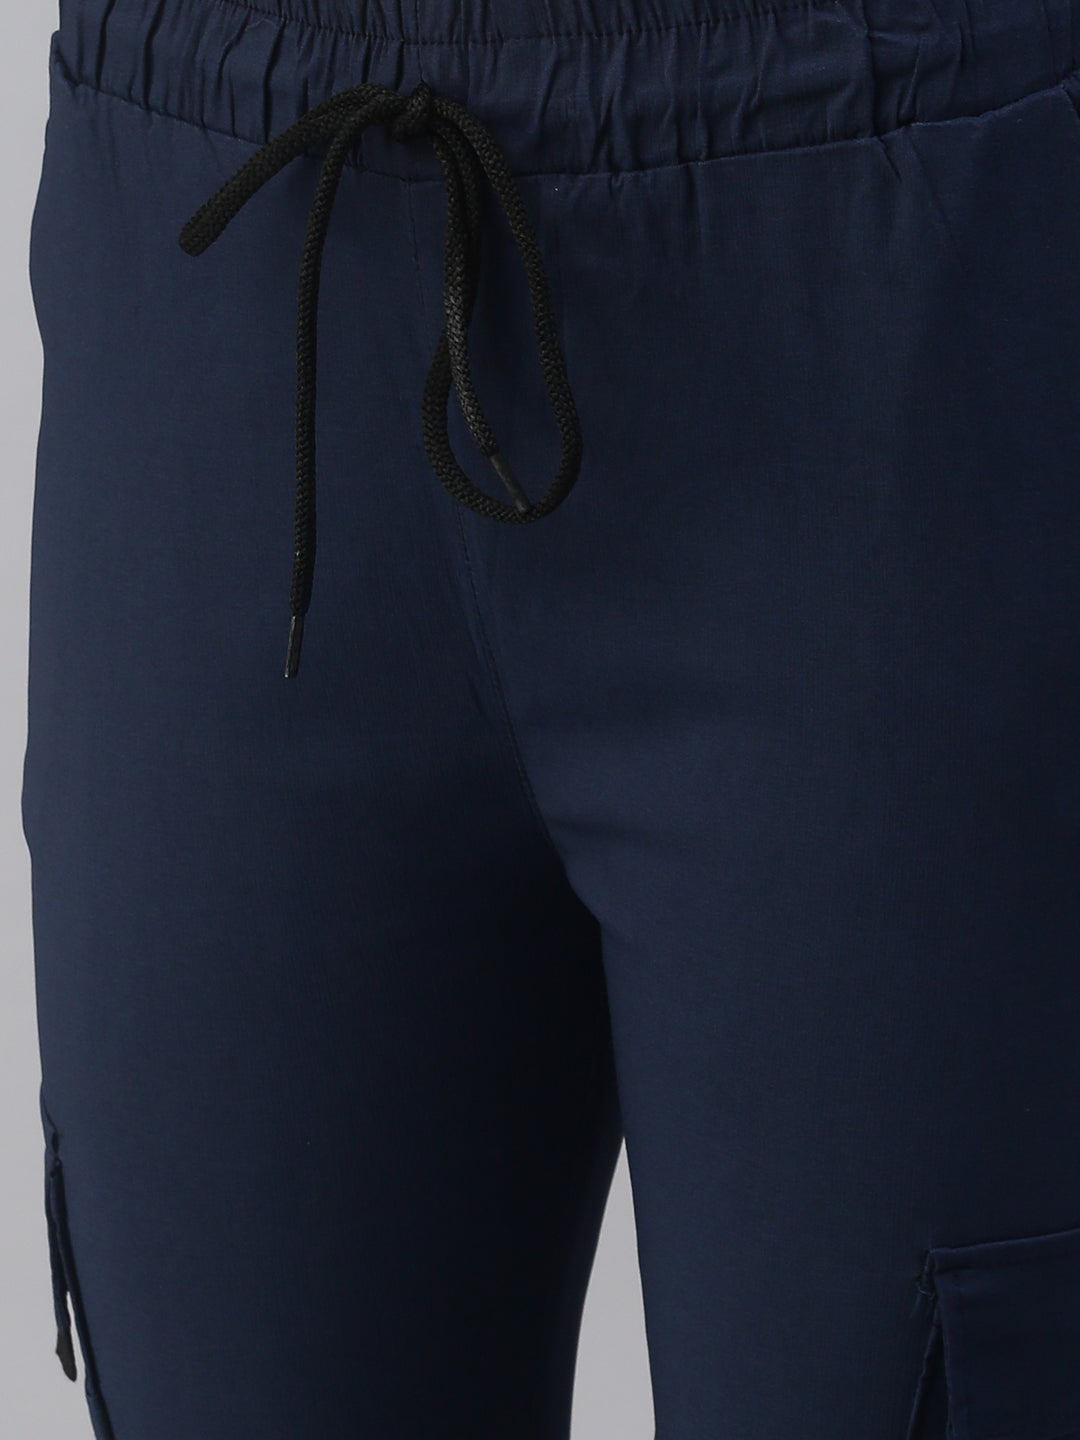 Women's Navy Blue Solid Joggers Track Pant